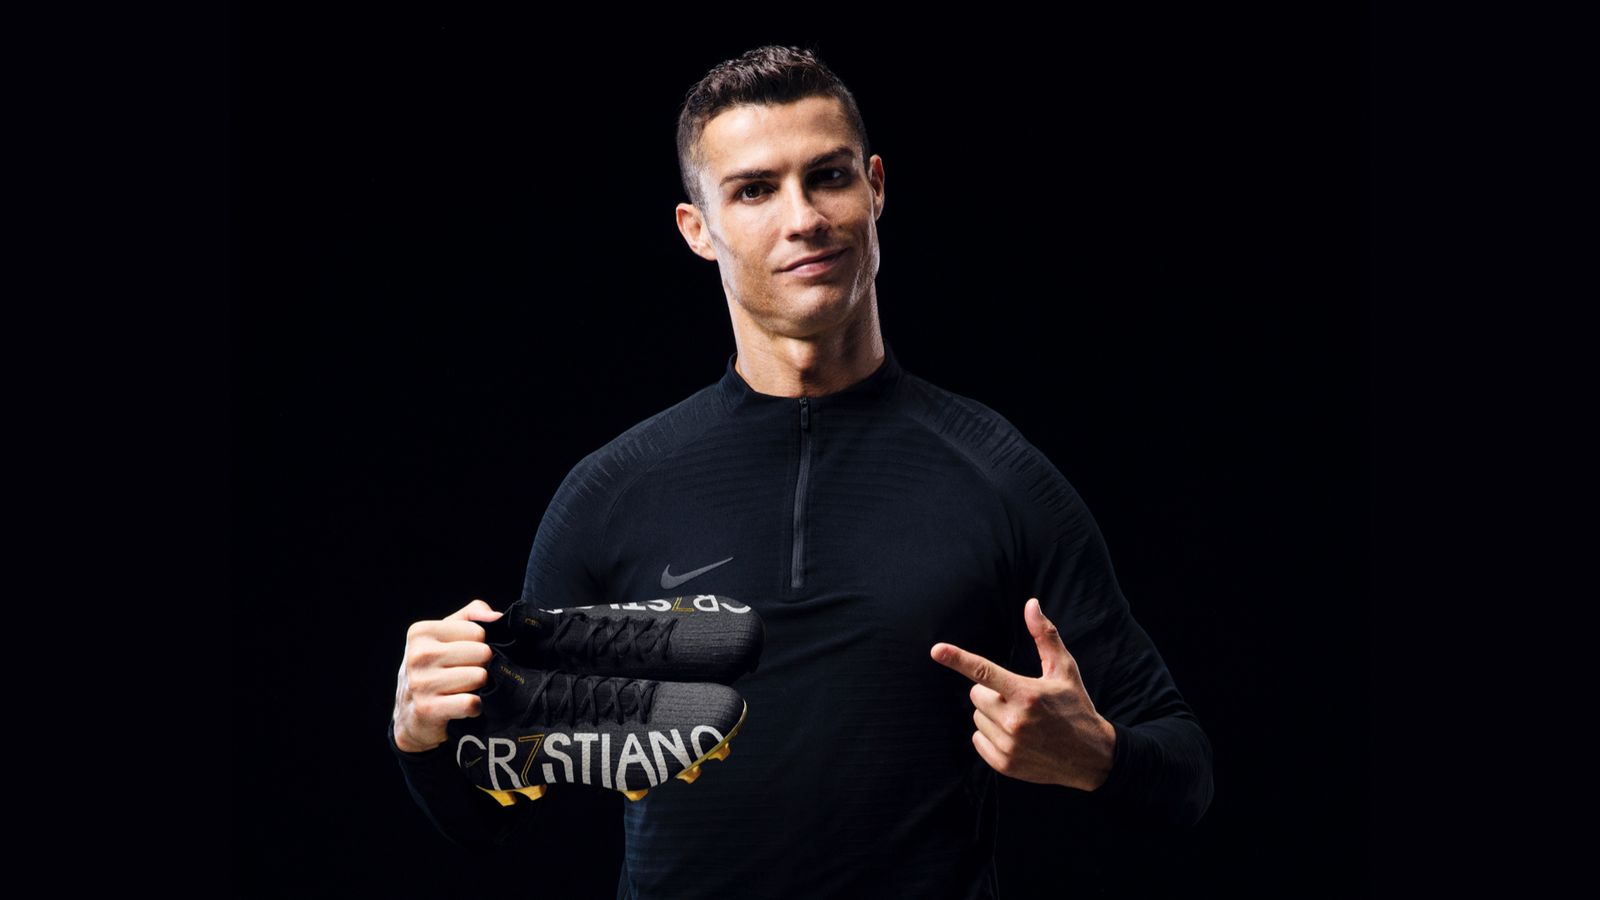 Restock: Limited-Edition Nike Mercurial Superfly Cristiano Ronaldo 2019 Signature Boots Released - Footy